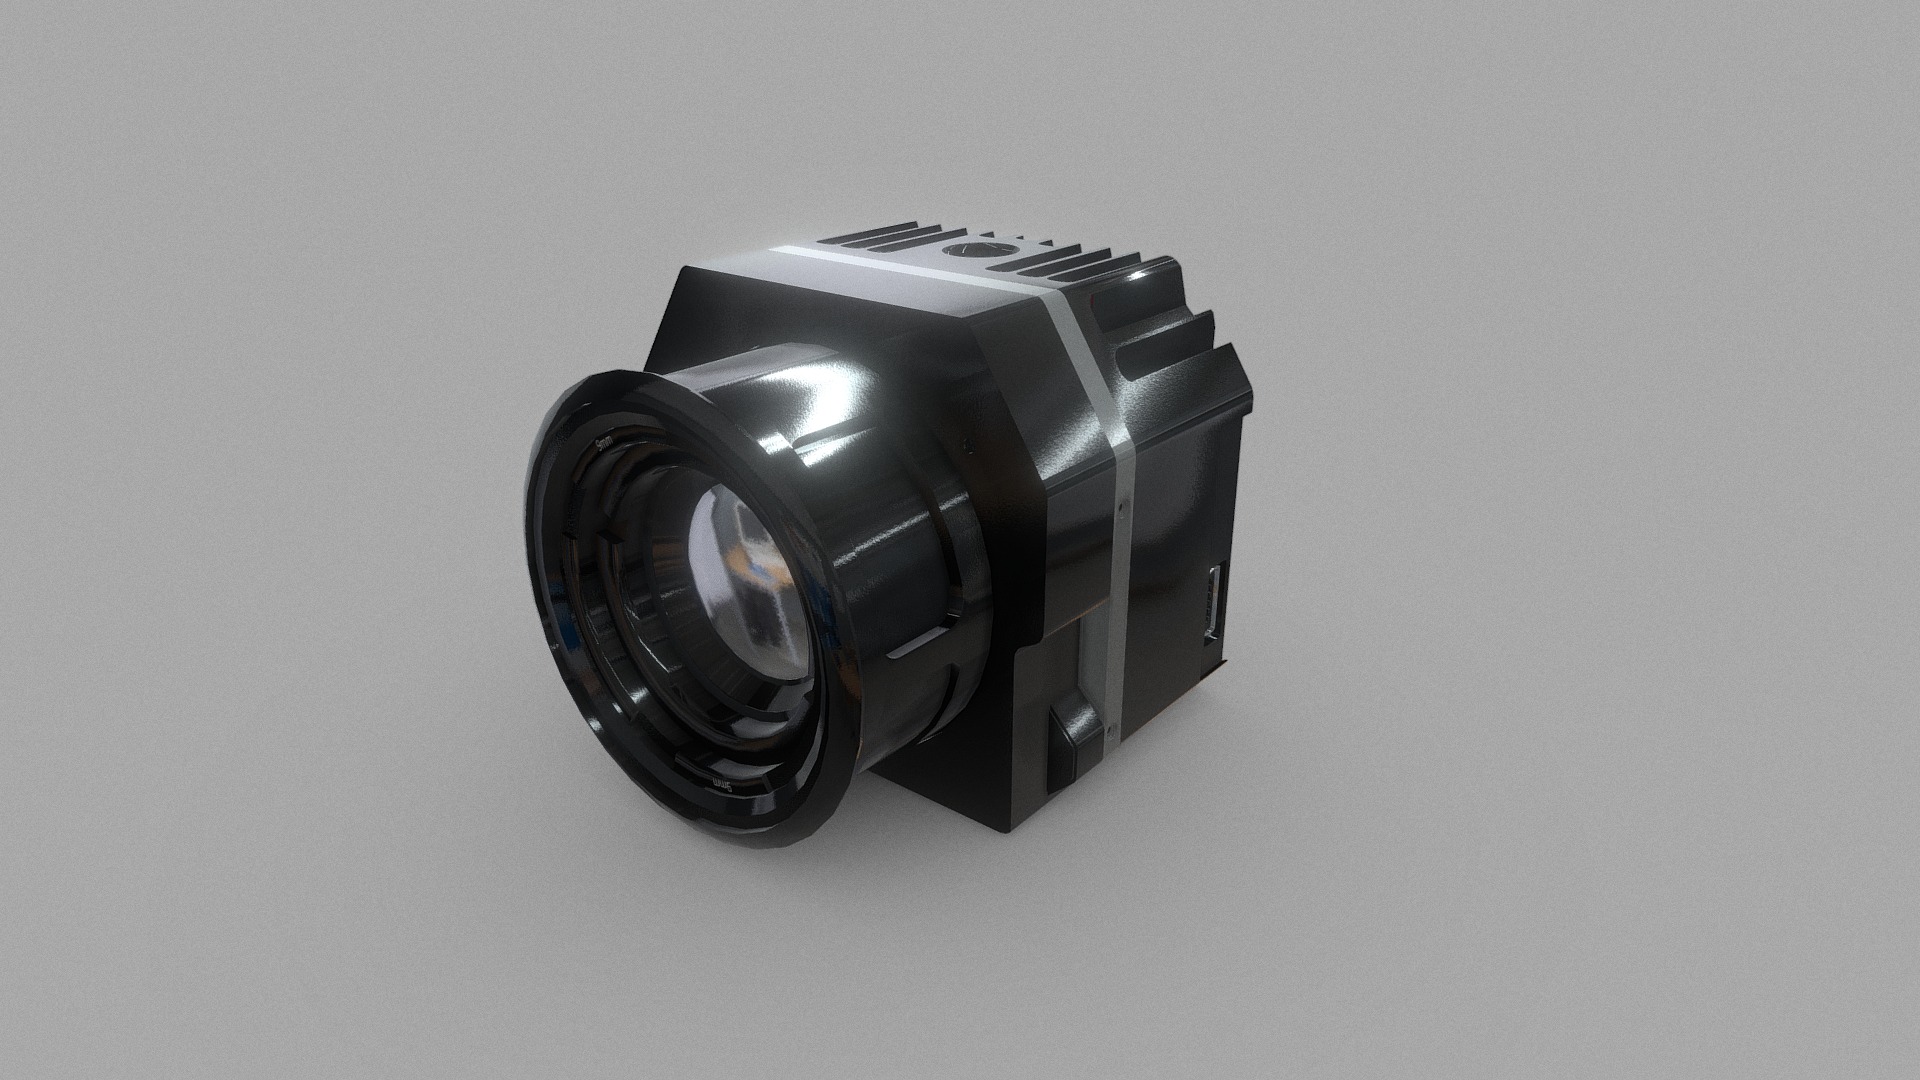 3D model Flir Vue Pro Thermal Camera - This is a 3D model of the Flir Vue Pro Thermal Camera. The 3D model is about a black and silver camera.